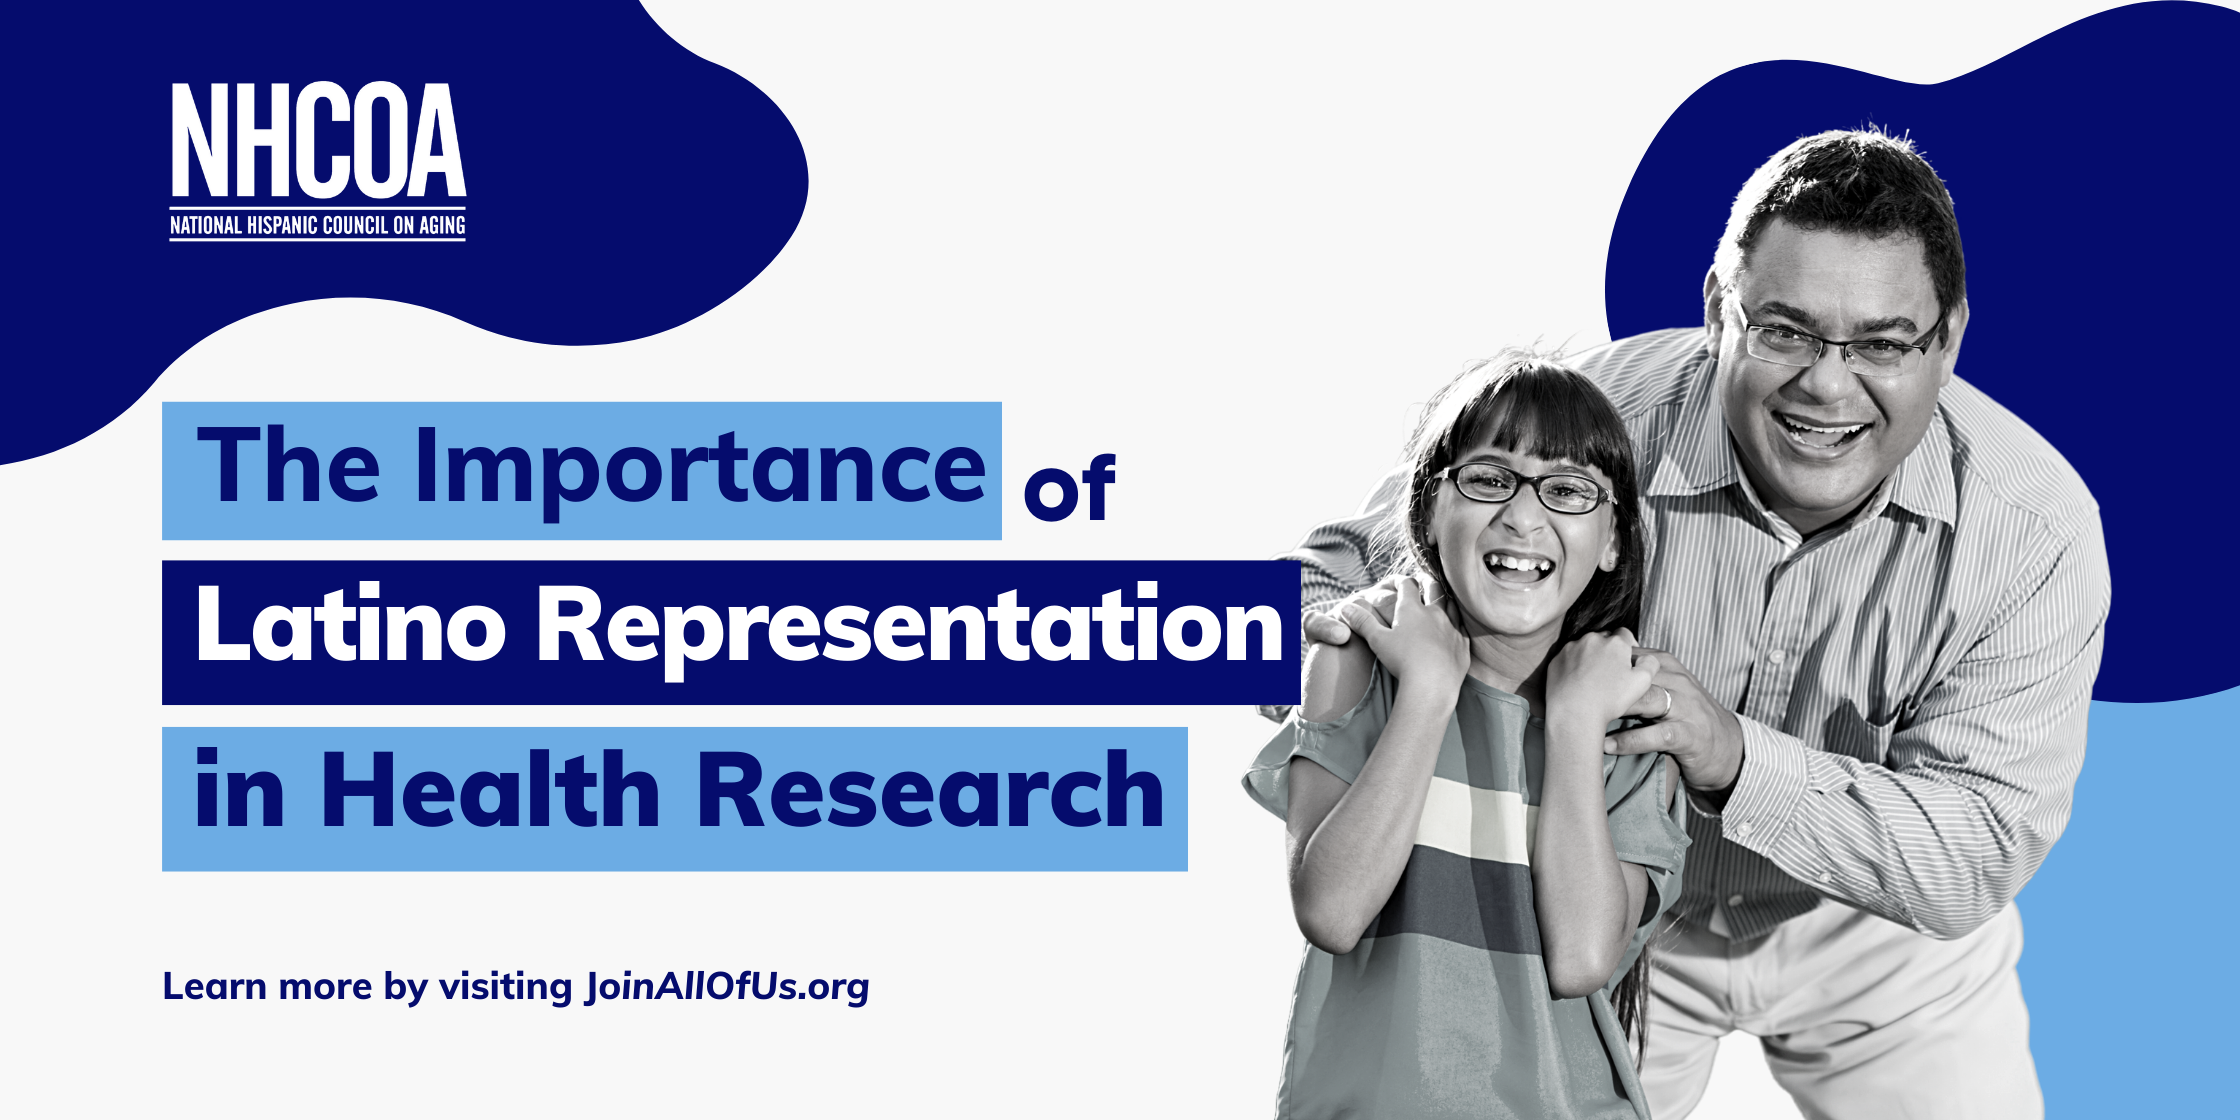 The Importance of Latino Representation in Health Research